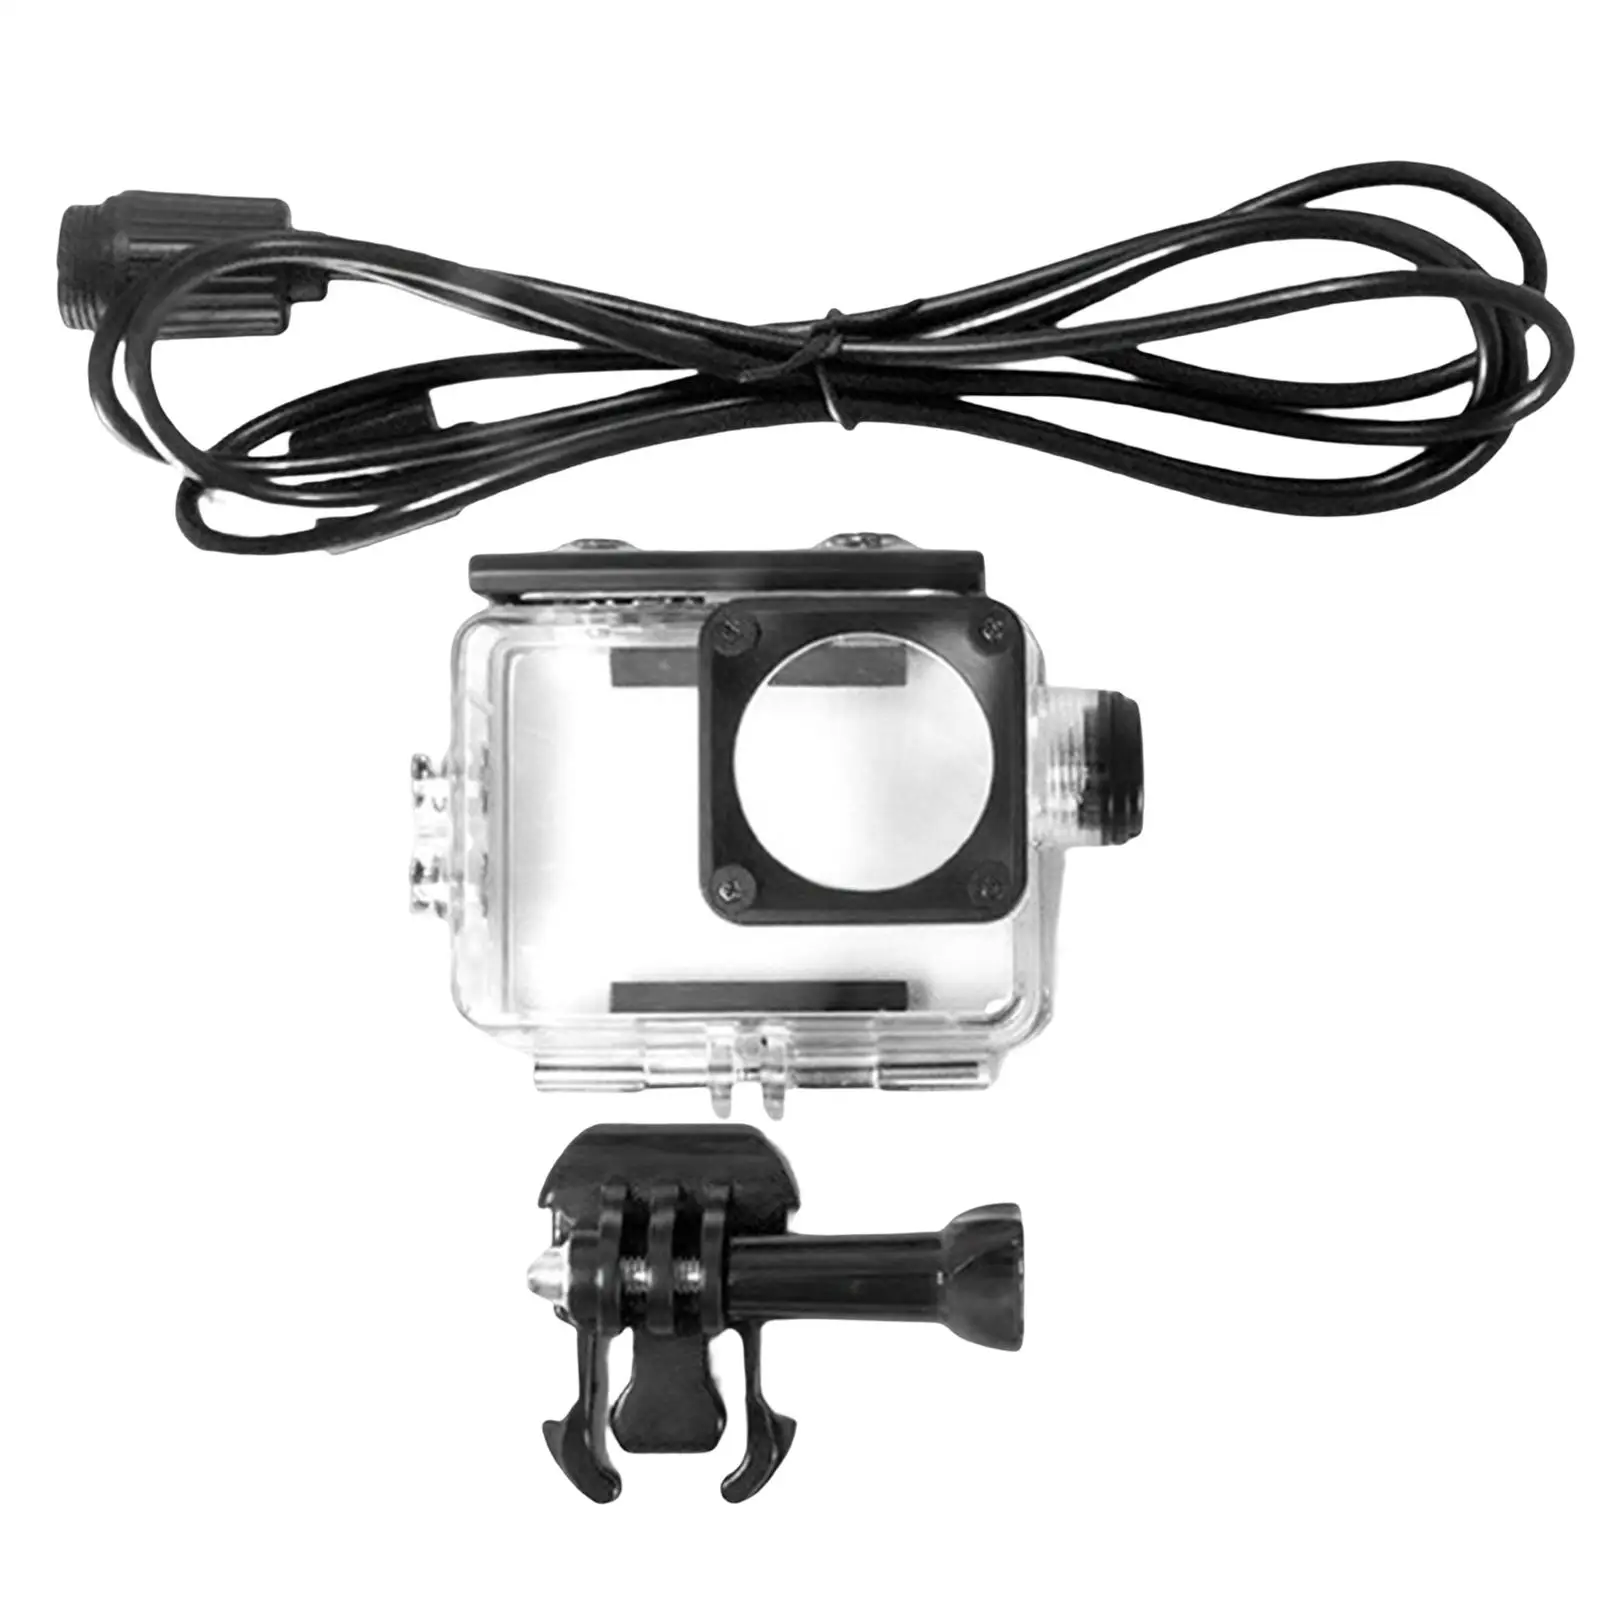 Sports Cameras Waterproof Housing Case, Dive Rechargeable for 4K Eis WiFi Cameras